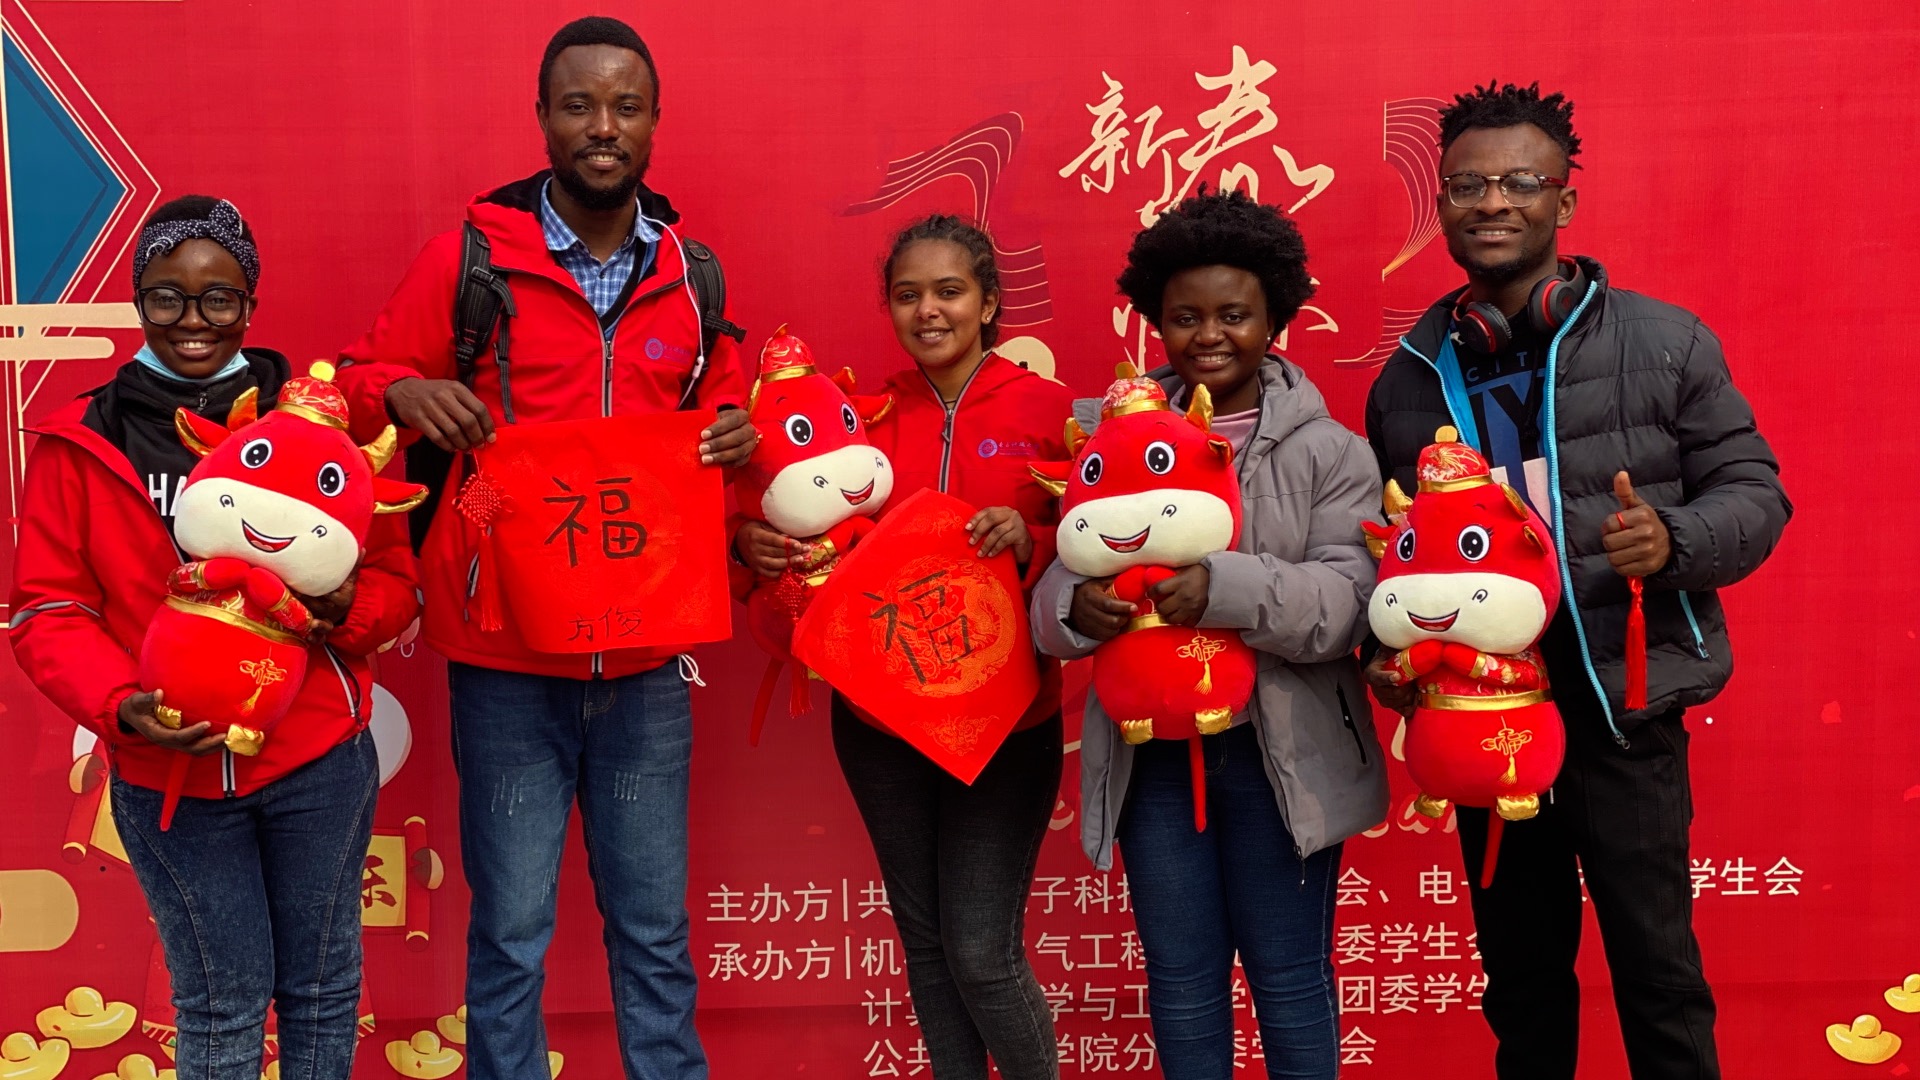 GLOBALink | How a Ghanaian student spends Chinese New Year holiday?